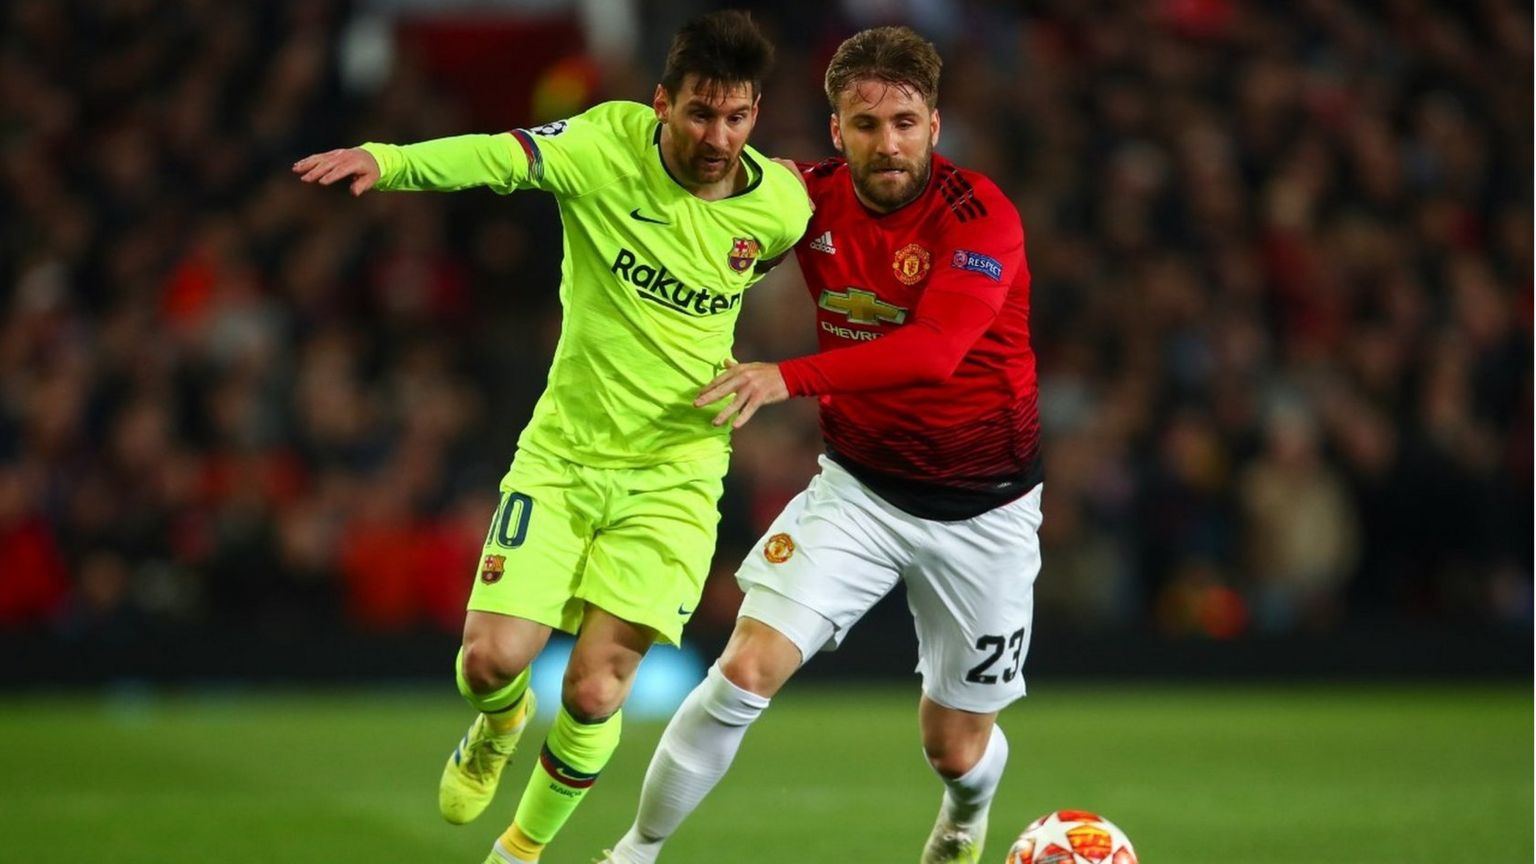 Lionel Messi of FC Barcelona and Luke Shaw of Manchester United during the UEFA Champions League Quarter Final first leg match